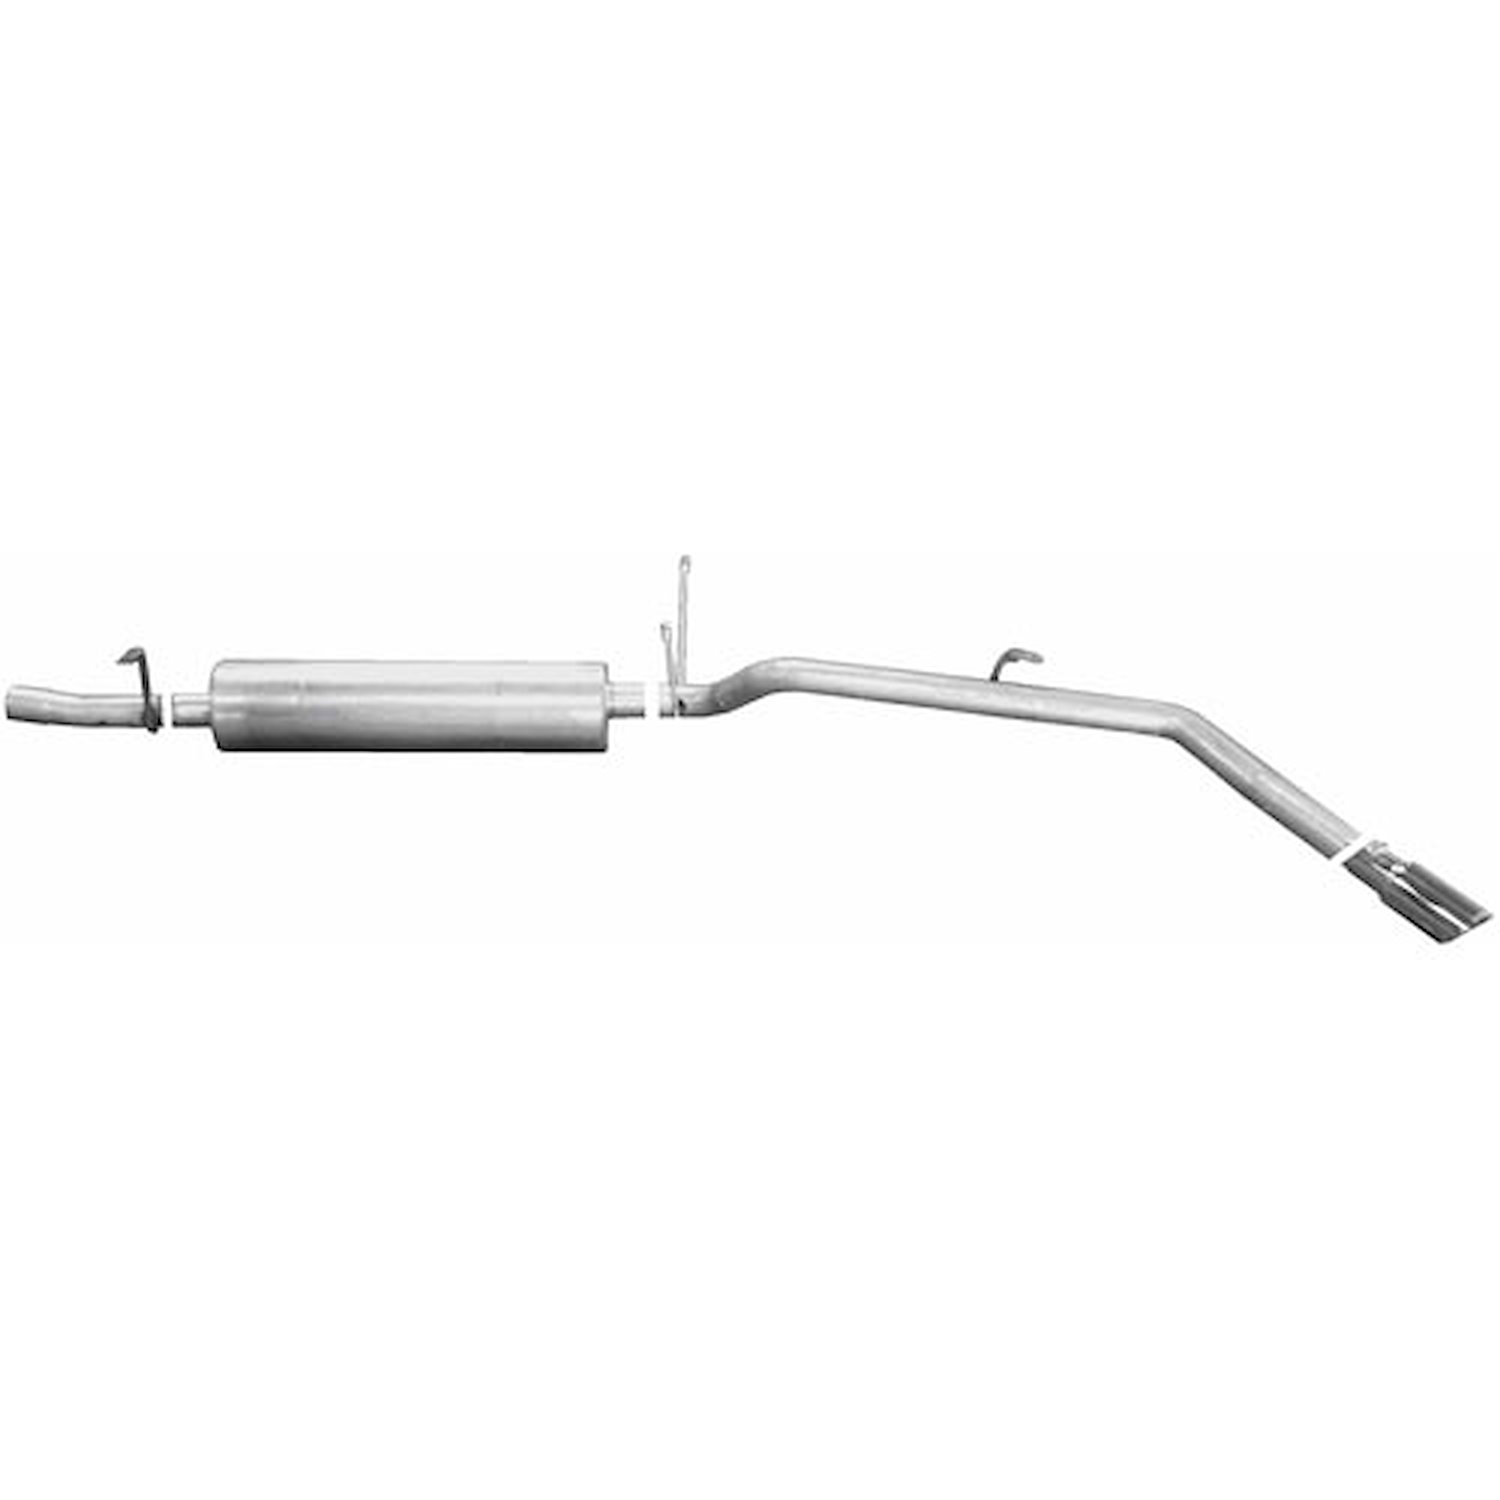 Swept-Side Cat-Back Exhaust 2003-05 for Nissan Xterra 3.3L Supercharged